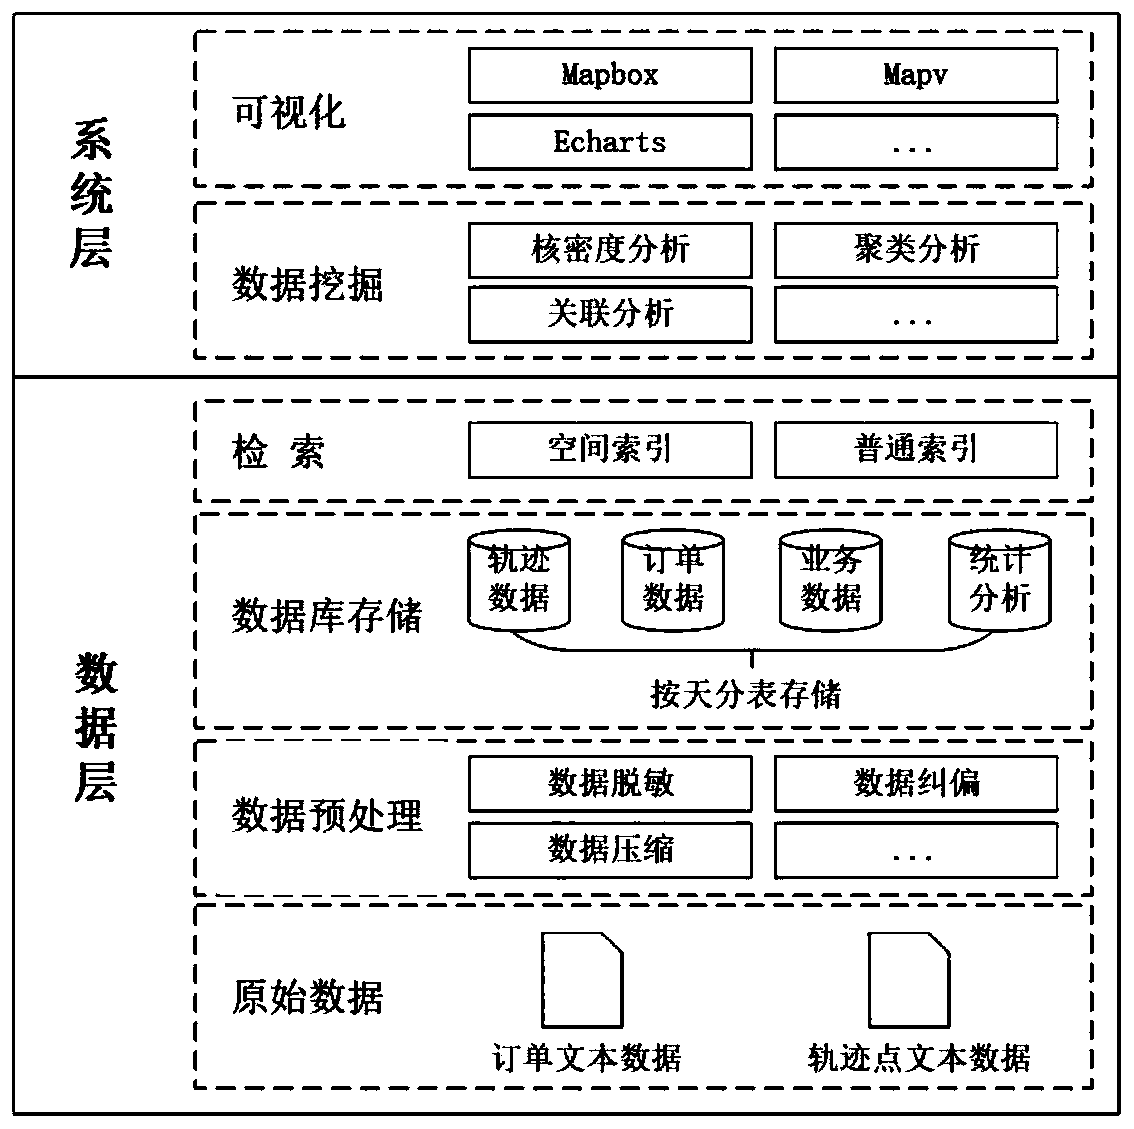 Trajectory data analysis and visualization method and system based on online car-hailing travel